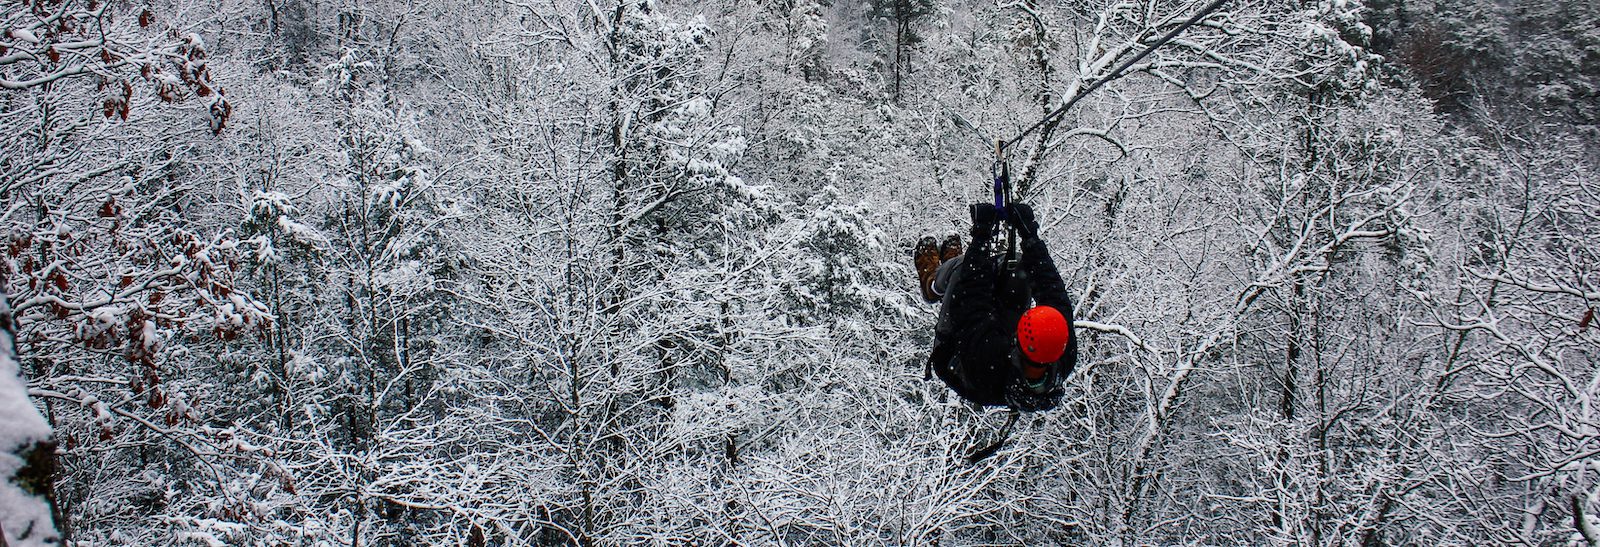 4 Reasons to Try Our Smoky Mountain Ziplines in the Winter